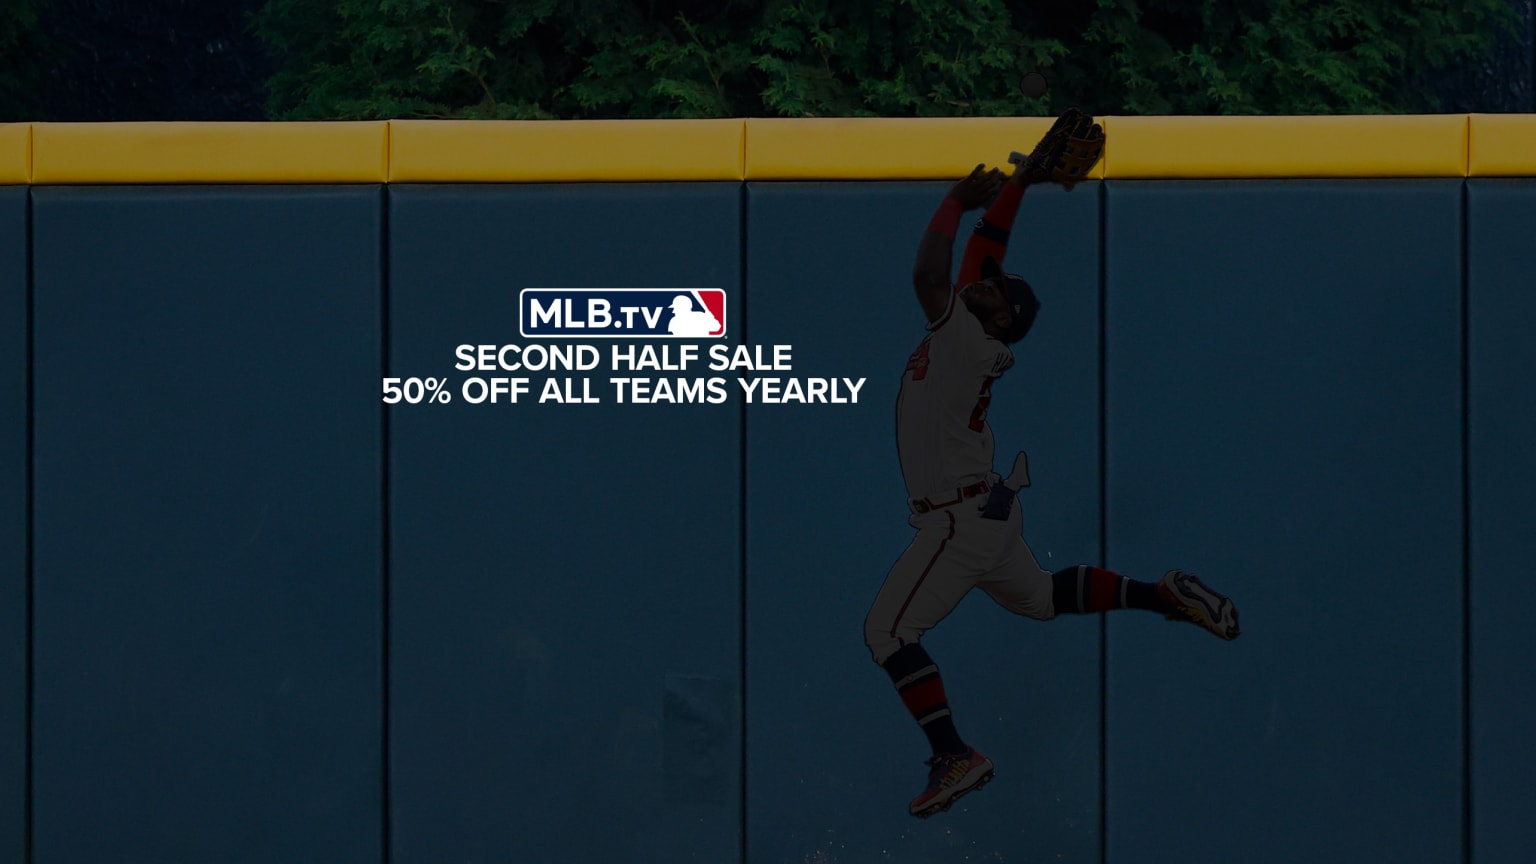 Designed image showing silhouette of a player with details of MLB.TV sale